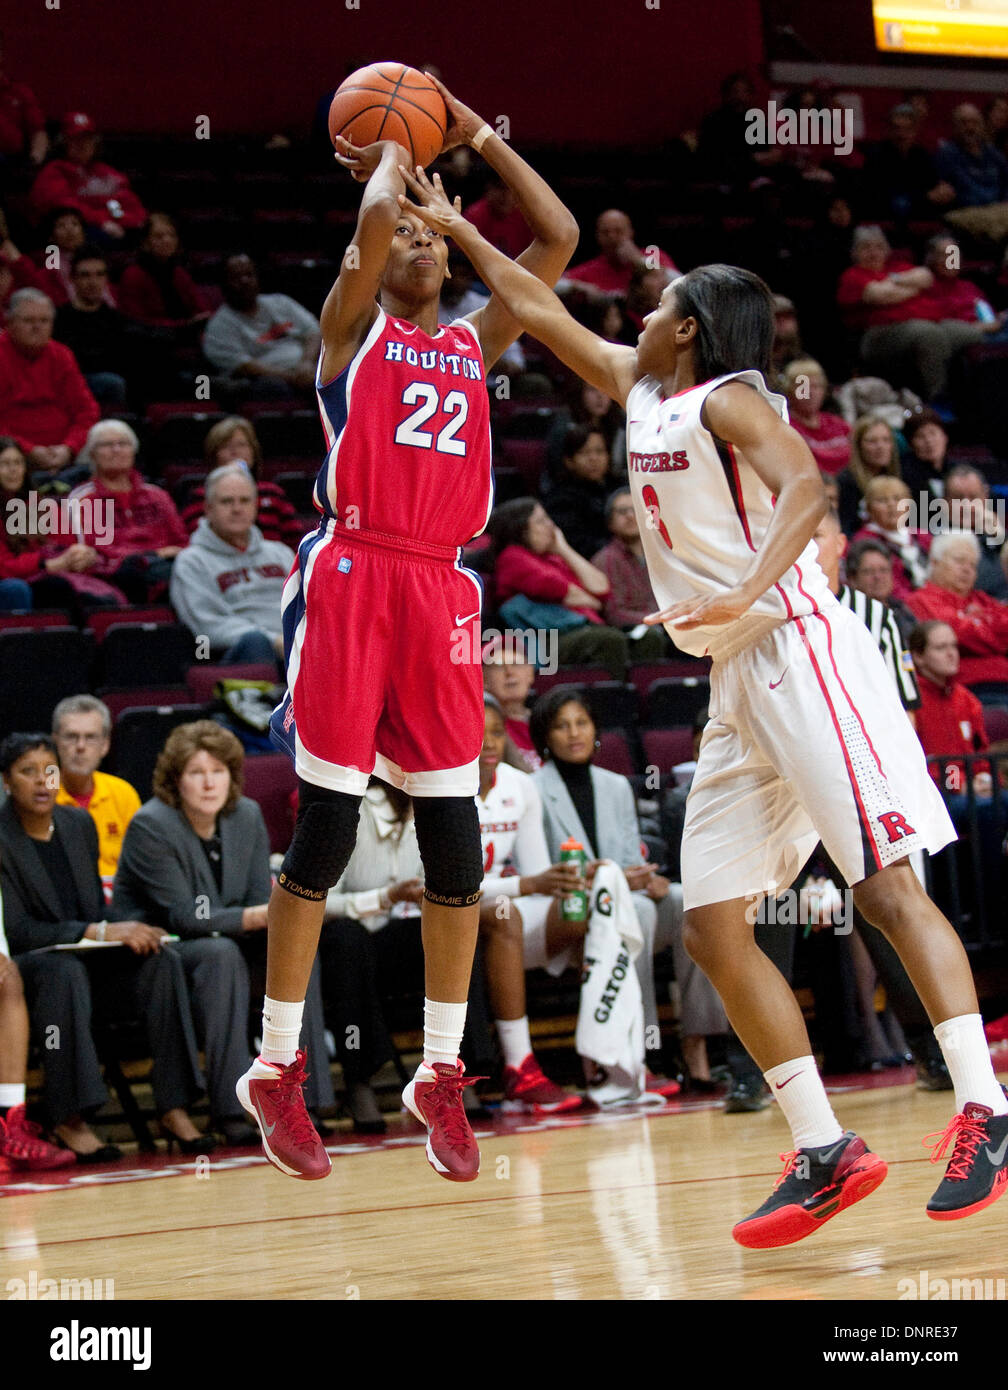 Piscataway, New Jersey, USA. 4th Jan, 2014. Houston's forward Marche' Amerson (22) shoots over Rutgers' guard Tyler Scaife (3) in the first half during American Athletic Conference basketball action between the Rutgers Scarlet Knights and the Houston Cougars at the Louis Brown Athletic Center (The RAC) in Piscataway, New Jersey. © csm/Alamy Live News Stock Photo